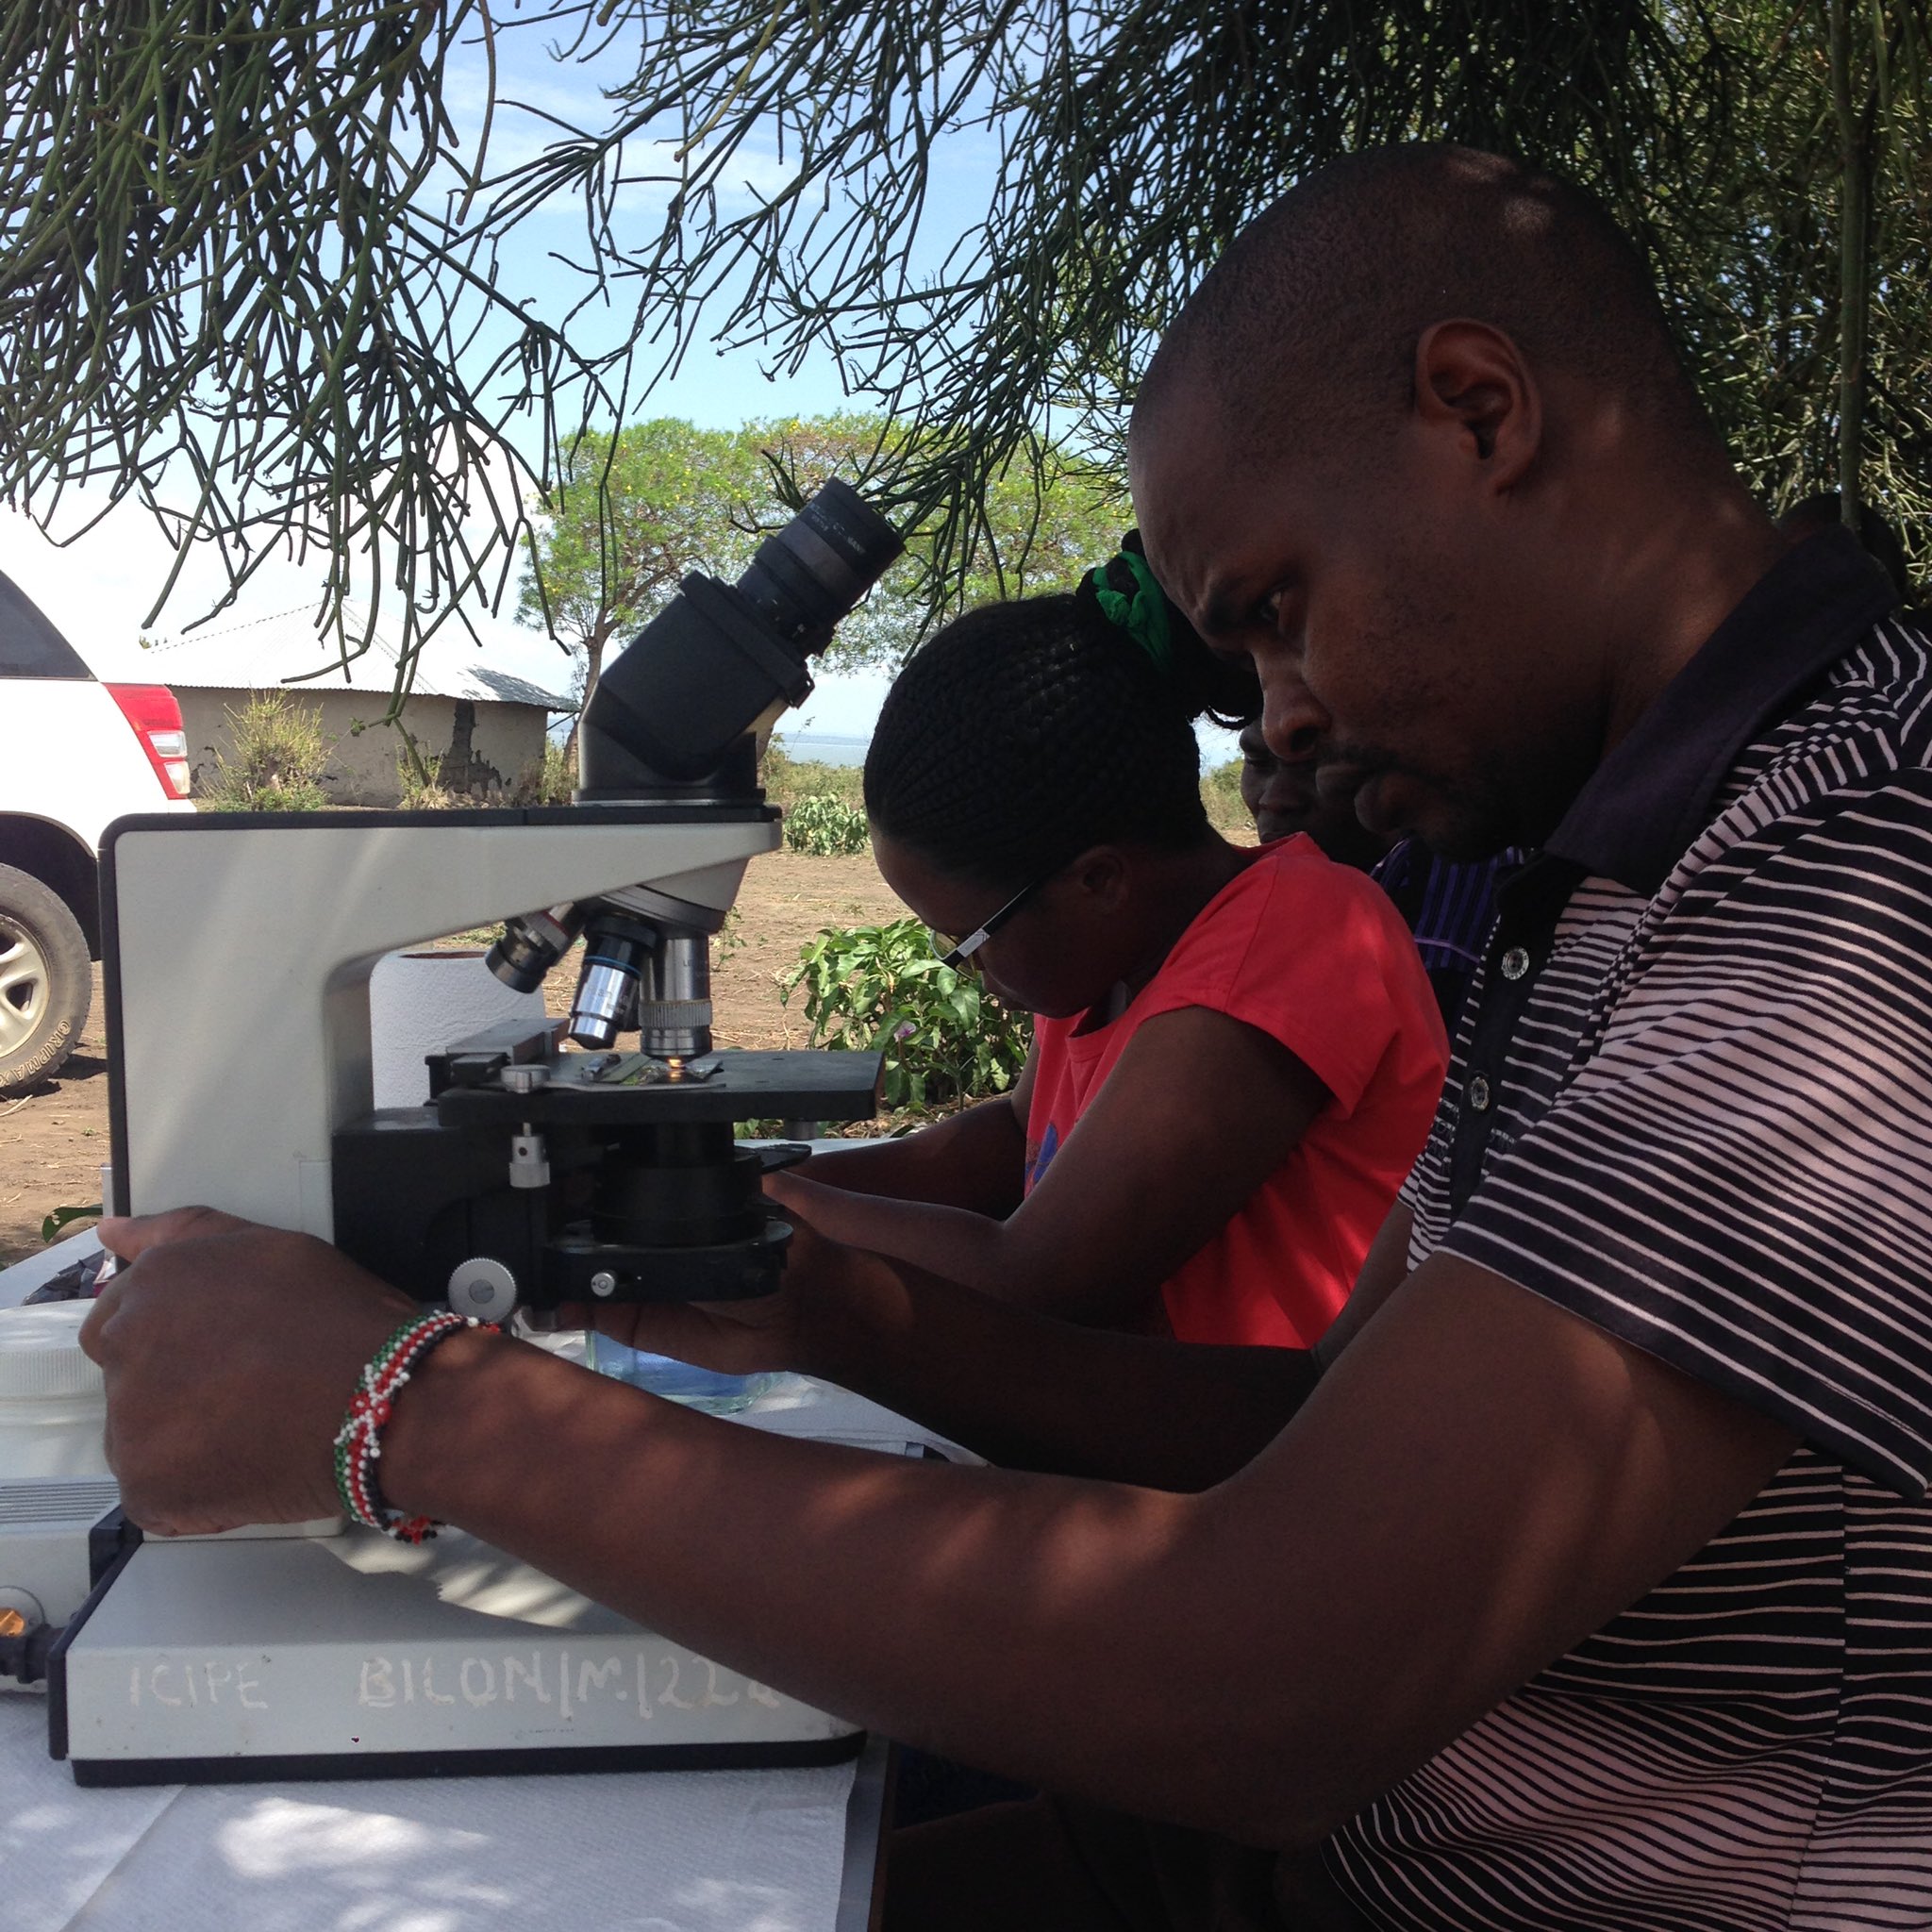 icipe scientists using microscope outdoors in Kenya